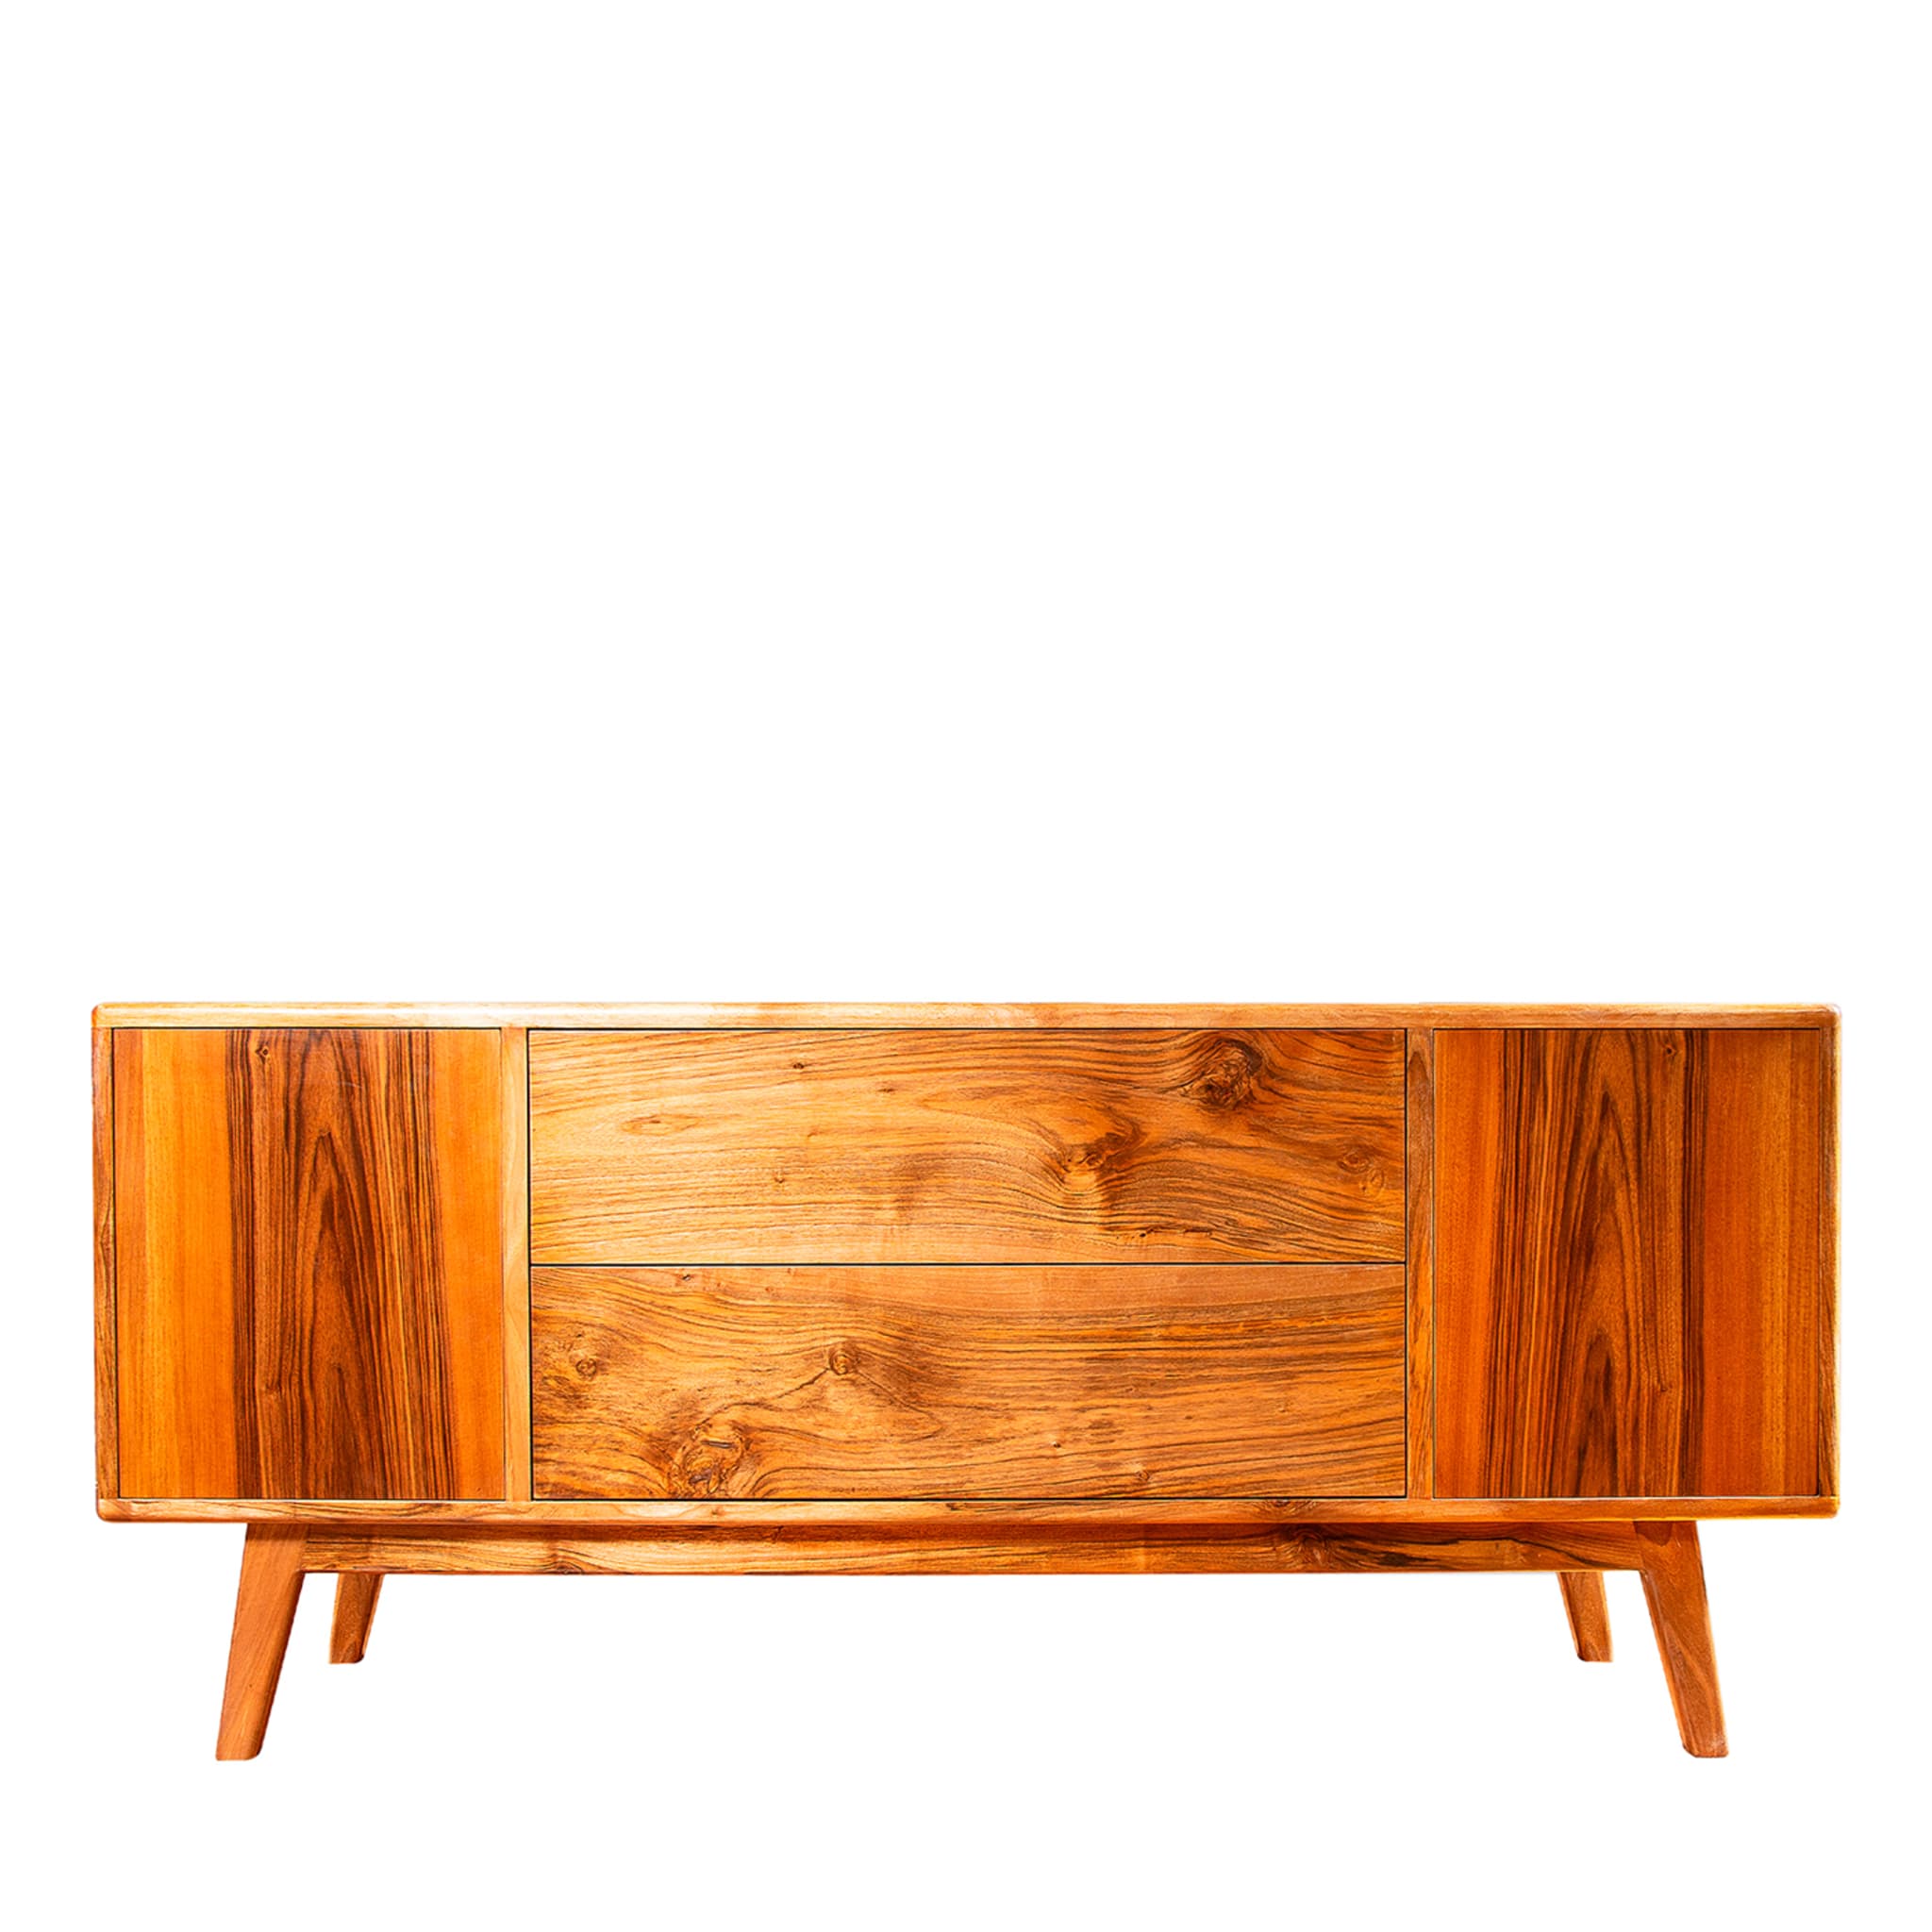 Dovetail Sideboard by Eugenio Gambella - Main view